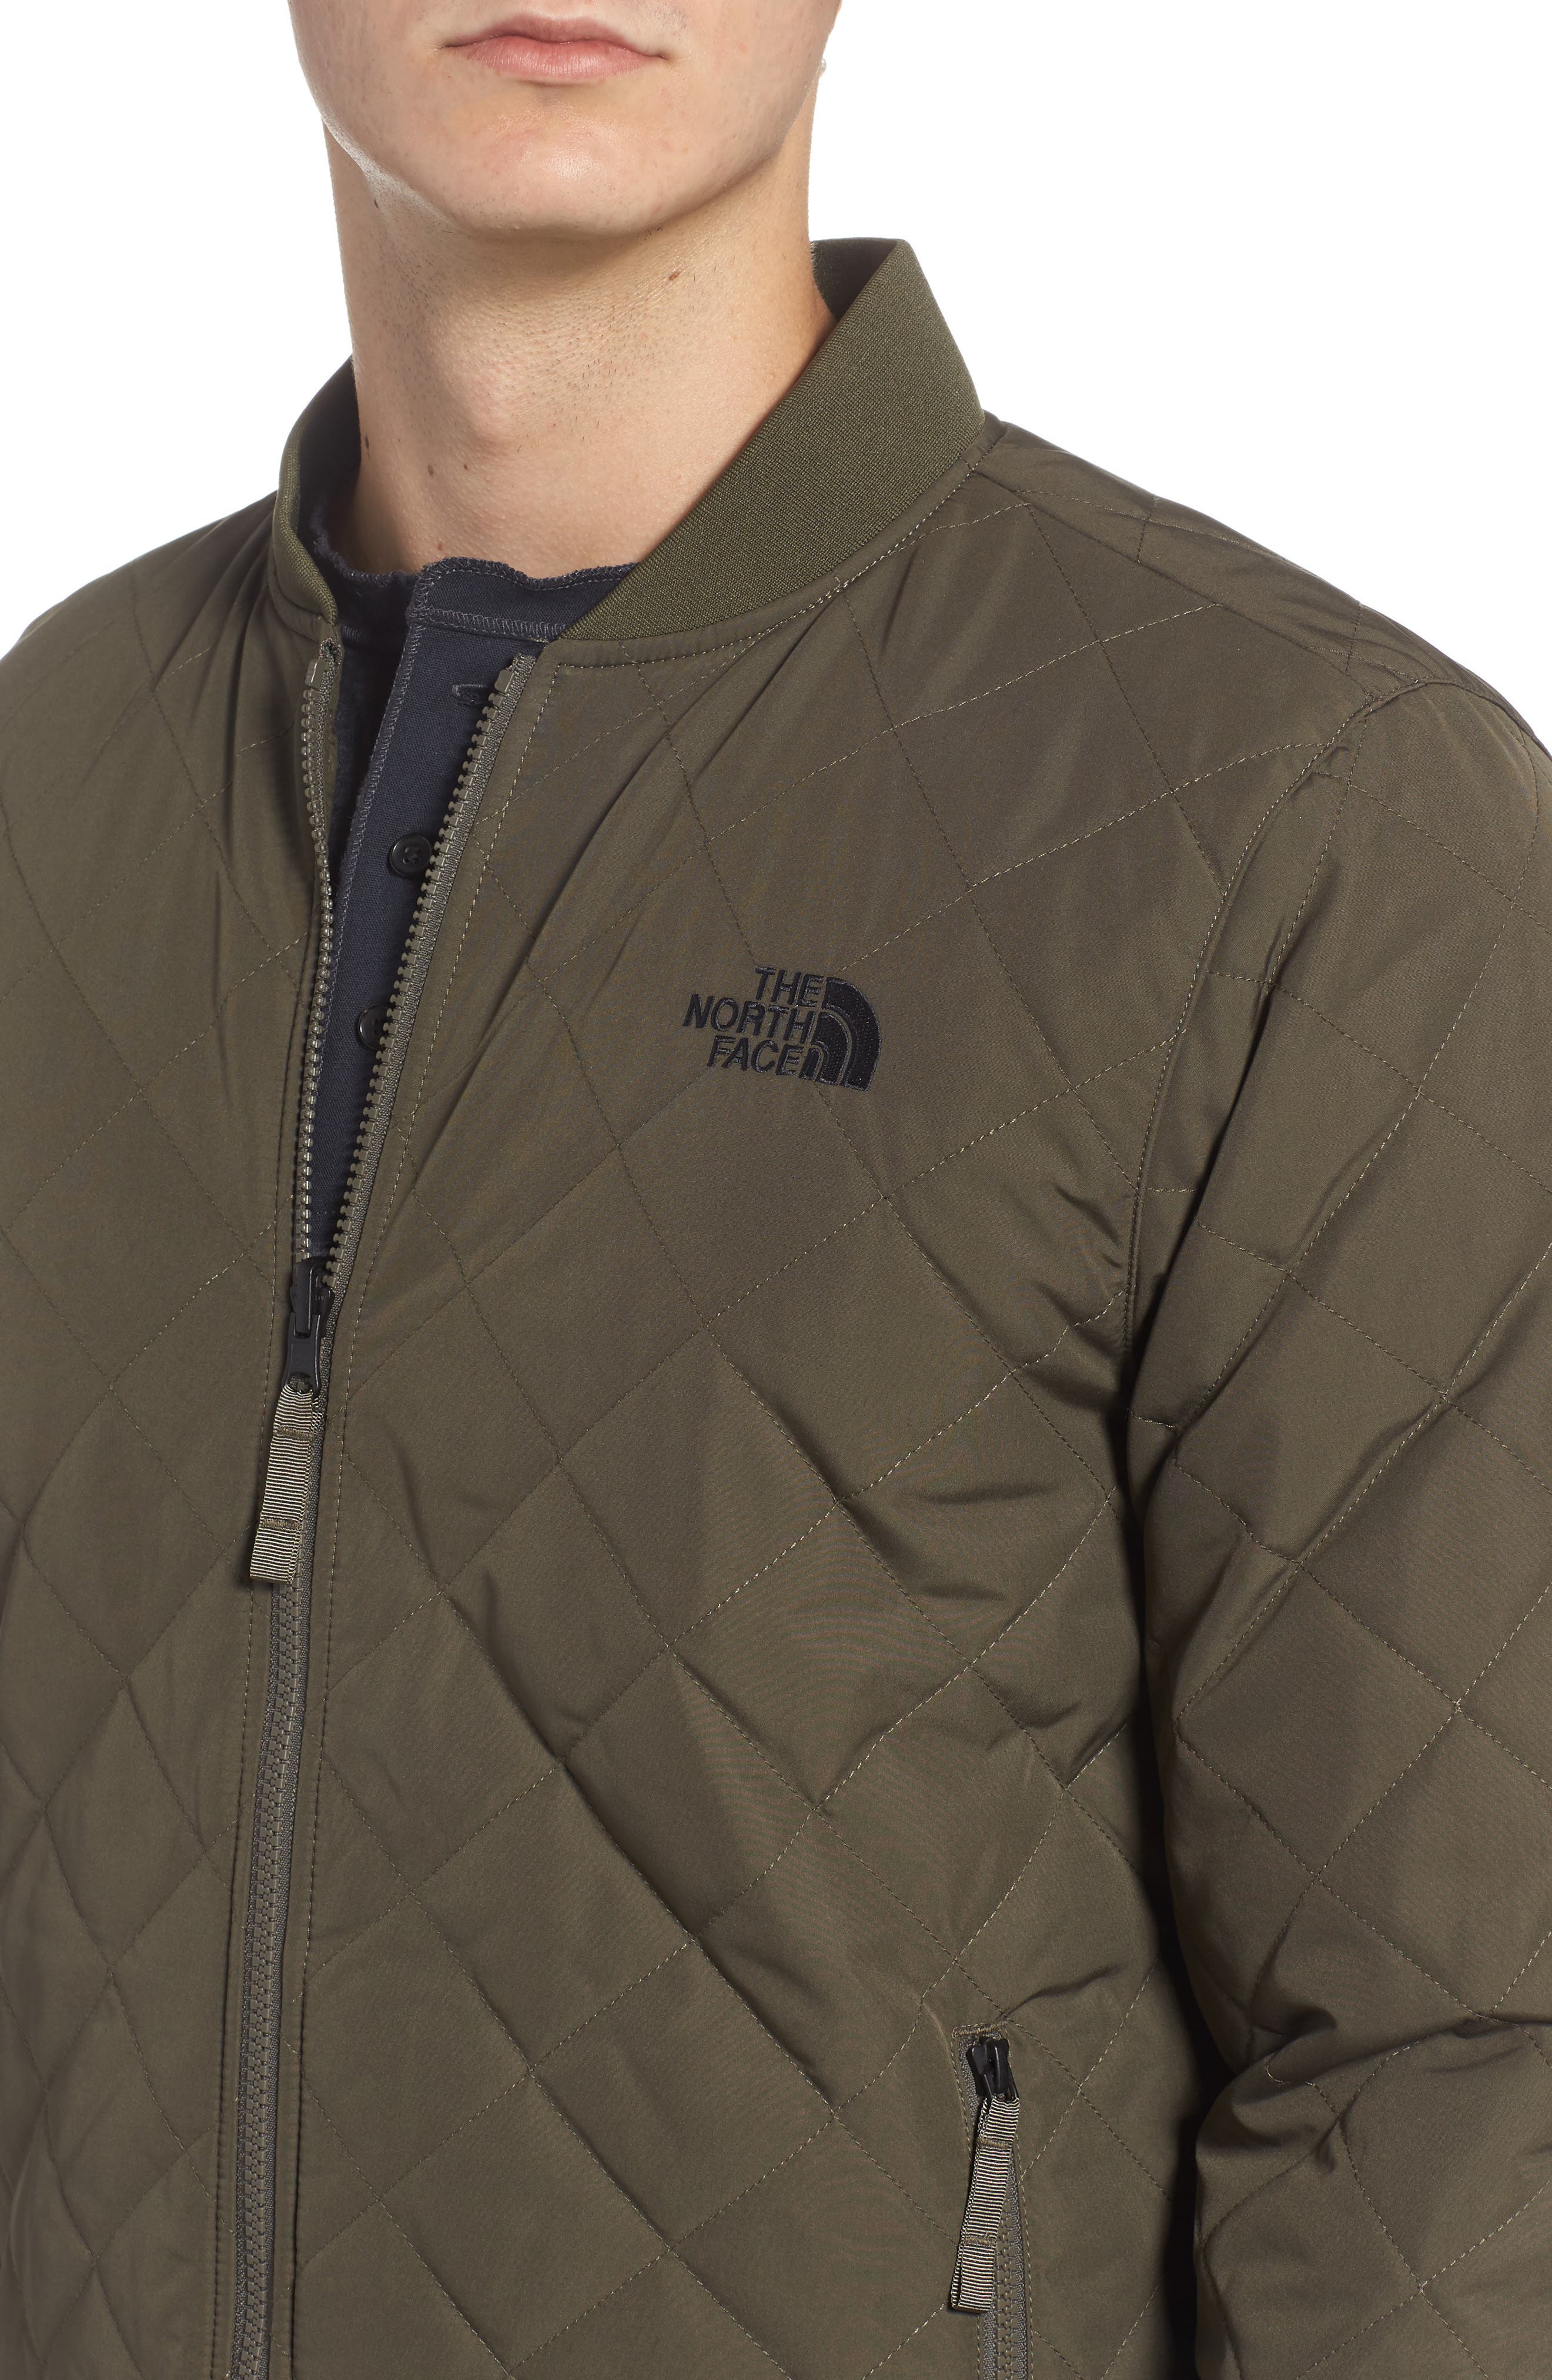 jester reversible bomber jacket the north face